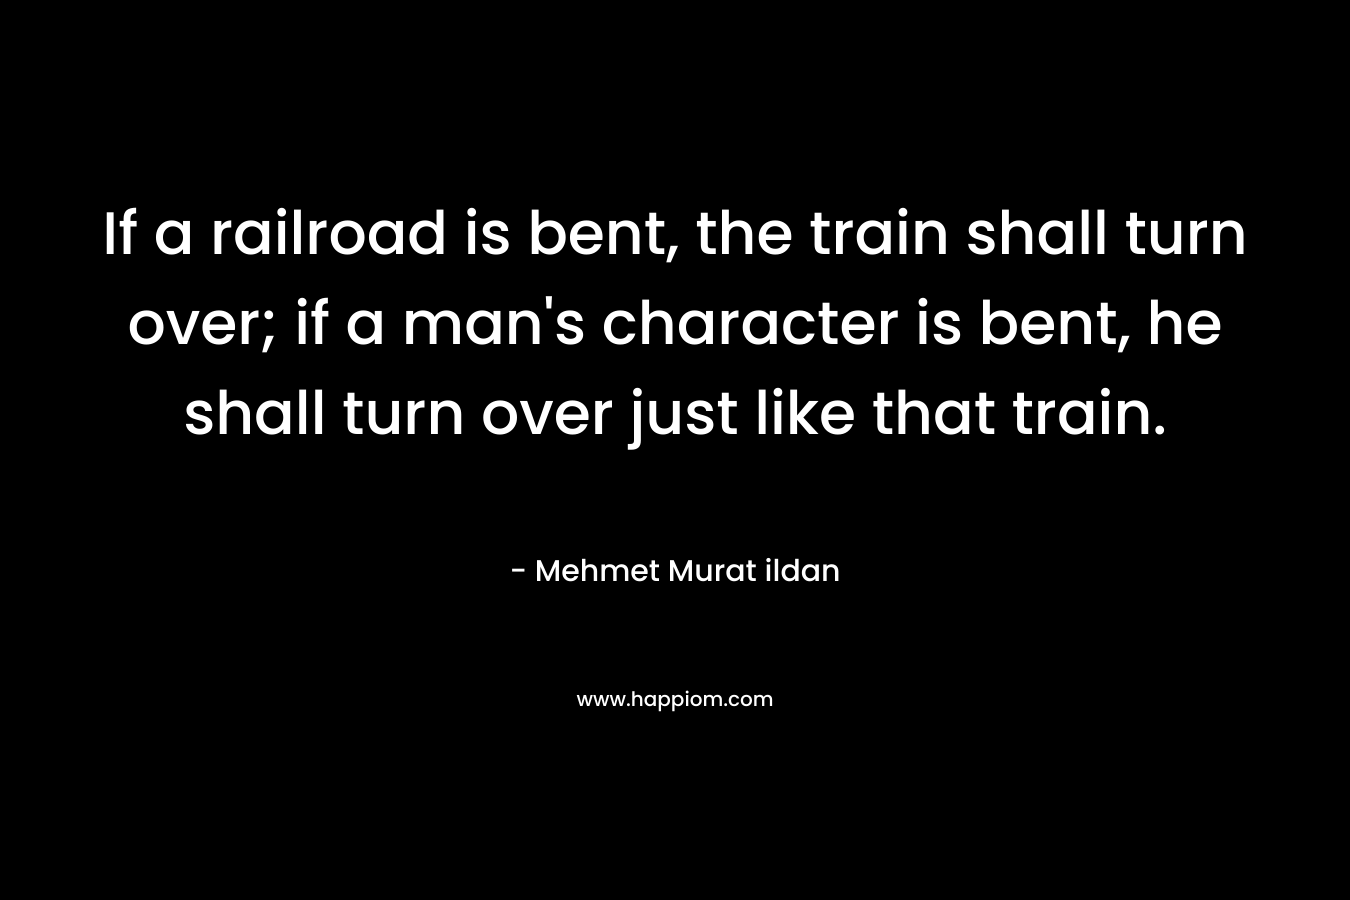 If a railroad is bent, the train shall turn over; if a man's character is bent, he shall turn over just like that train.